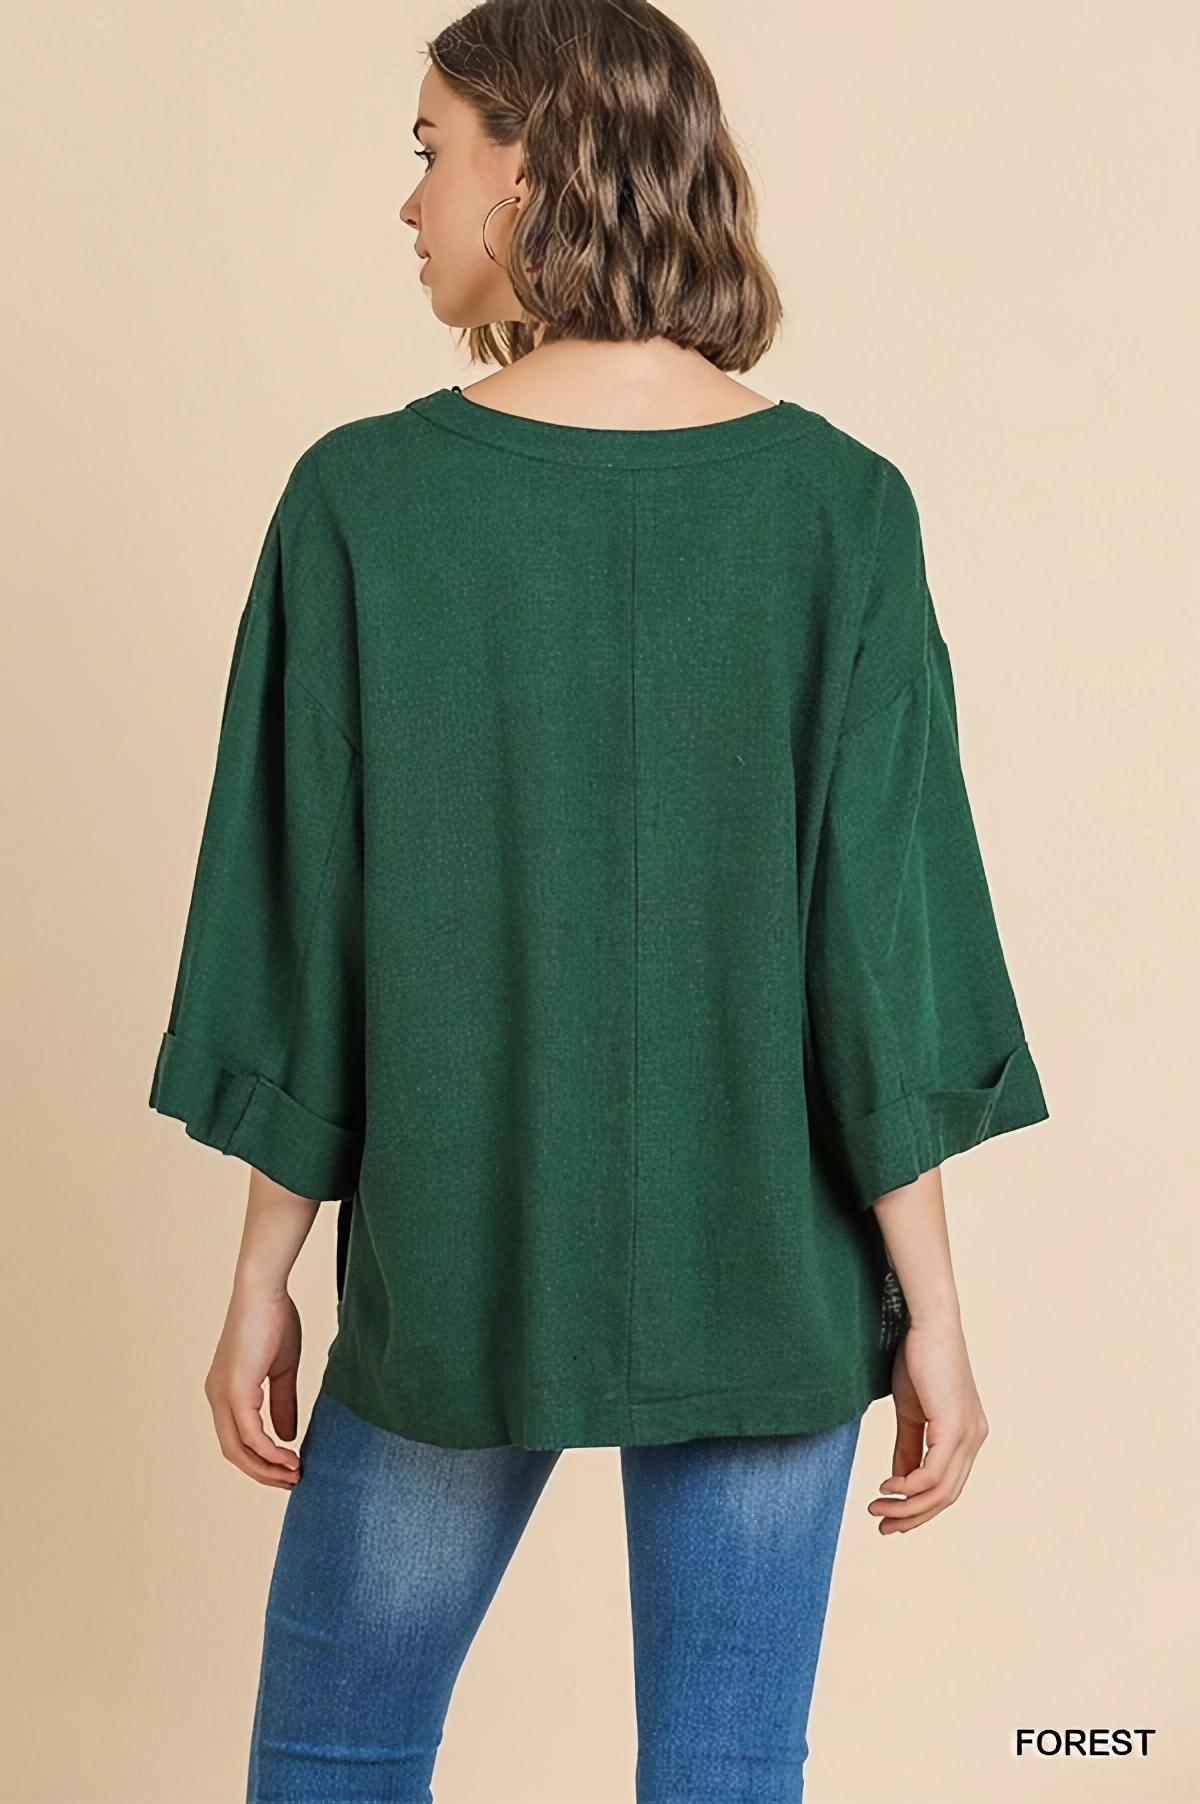 Folded Sleeve V-Neck Top with High Low Side Slit by Umgee